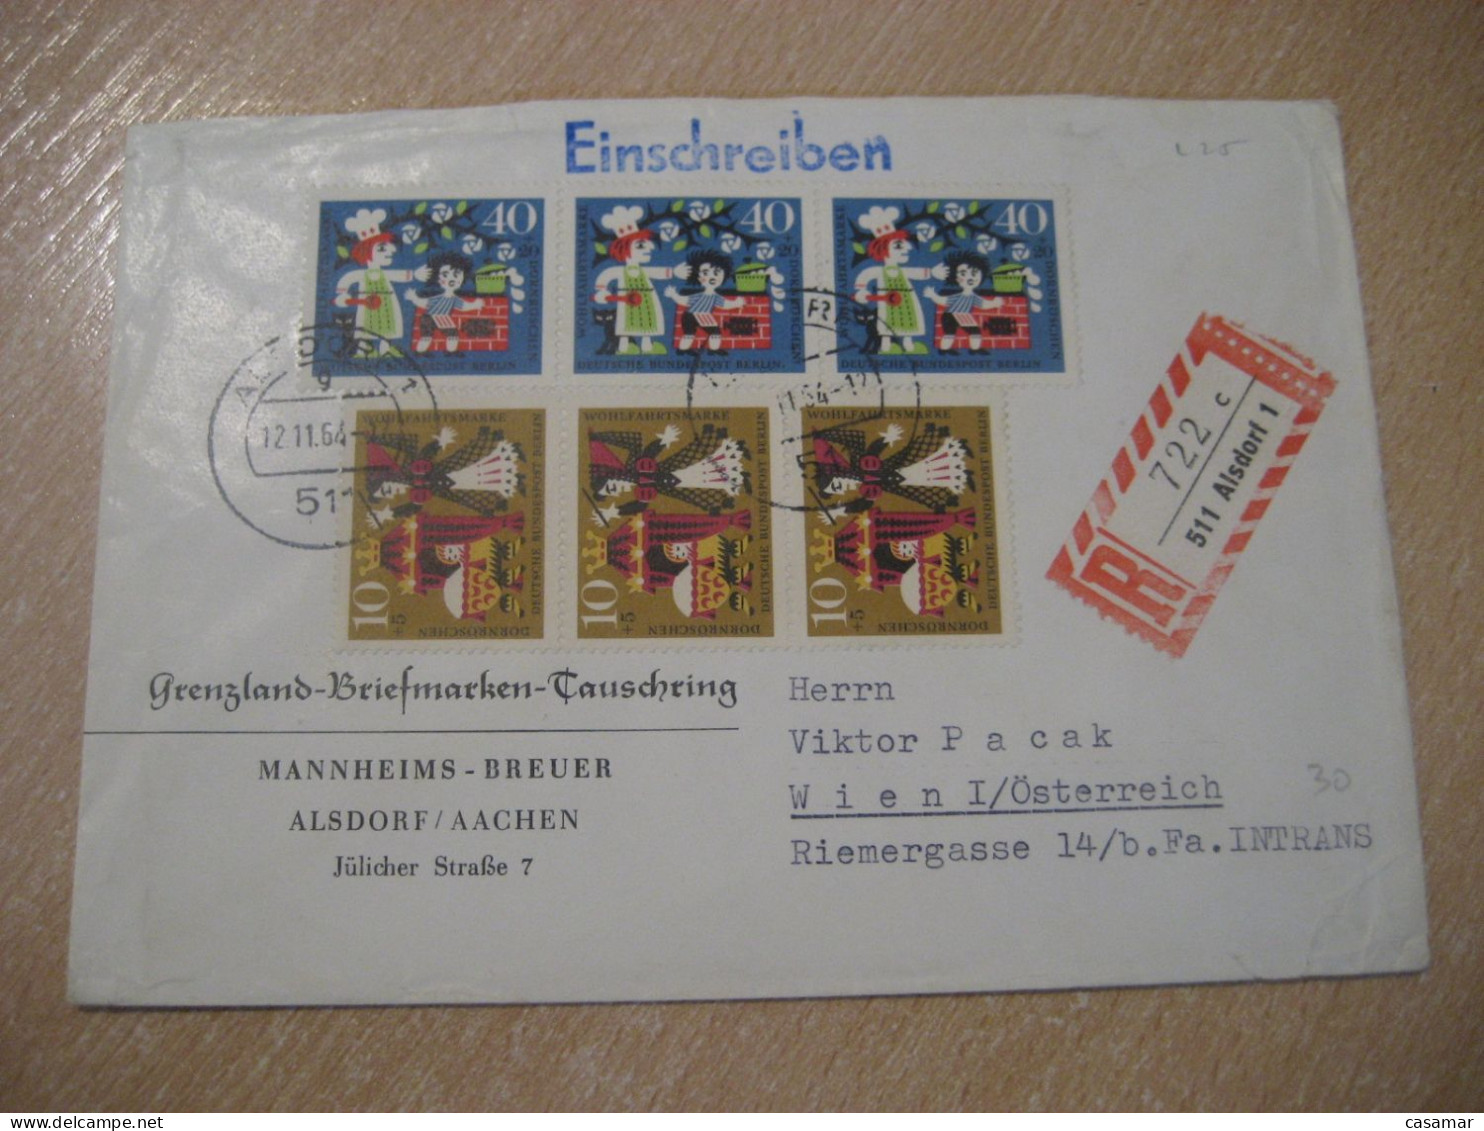 ALSDORF 1964 To Wien Austria Registered Cancel Cover GERMANY - Covers & Documents